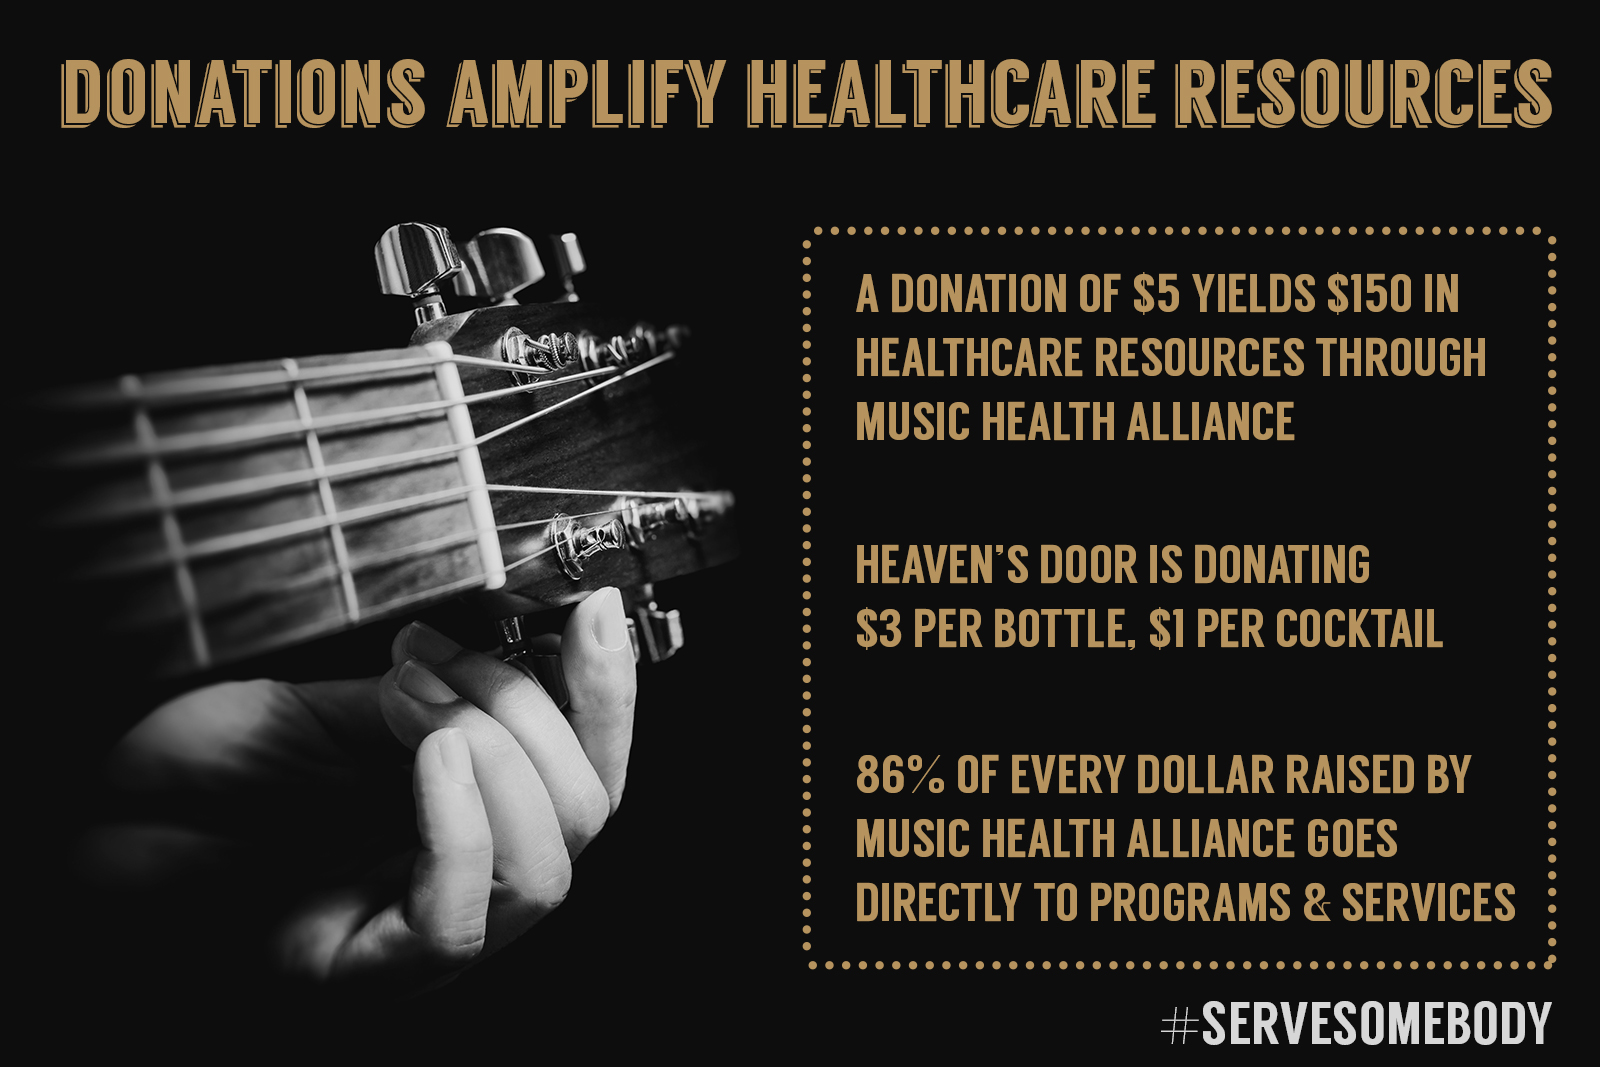 Donations amplify healthcare resources